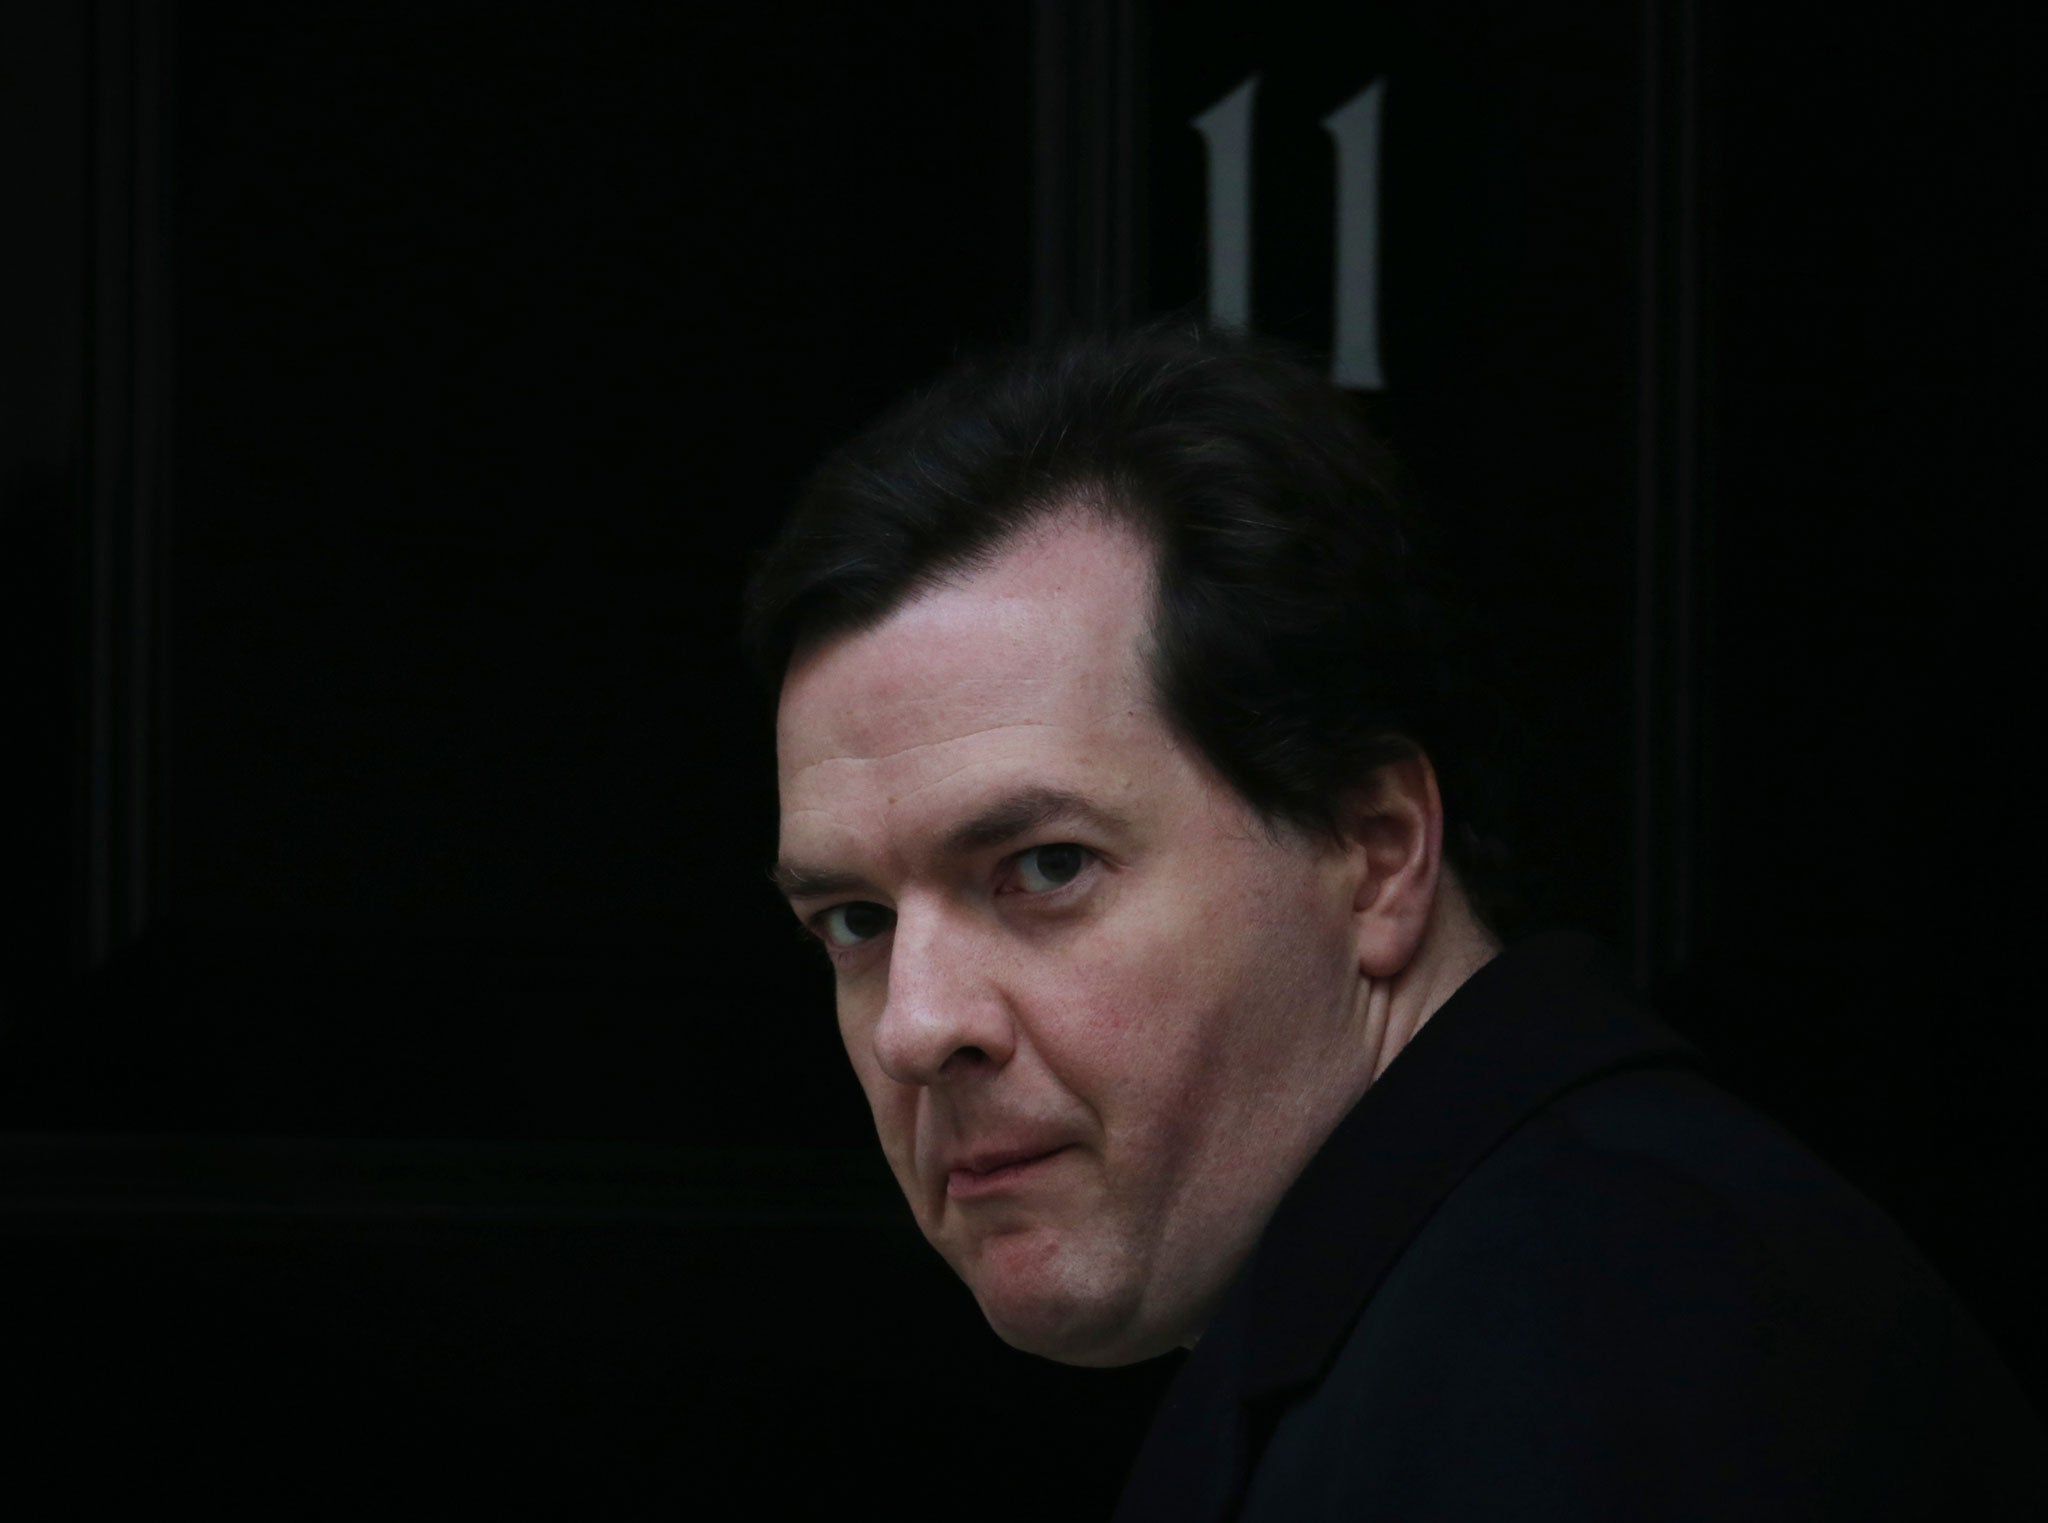 George Osborne might have misjudged repealing the 50p tax rate